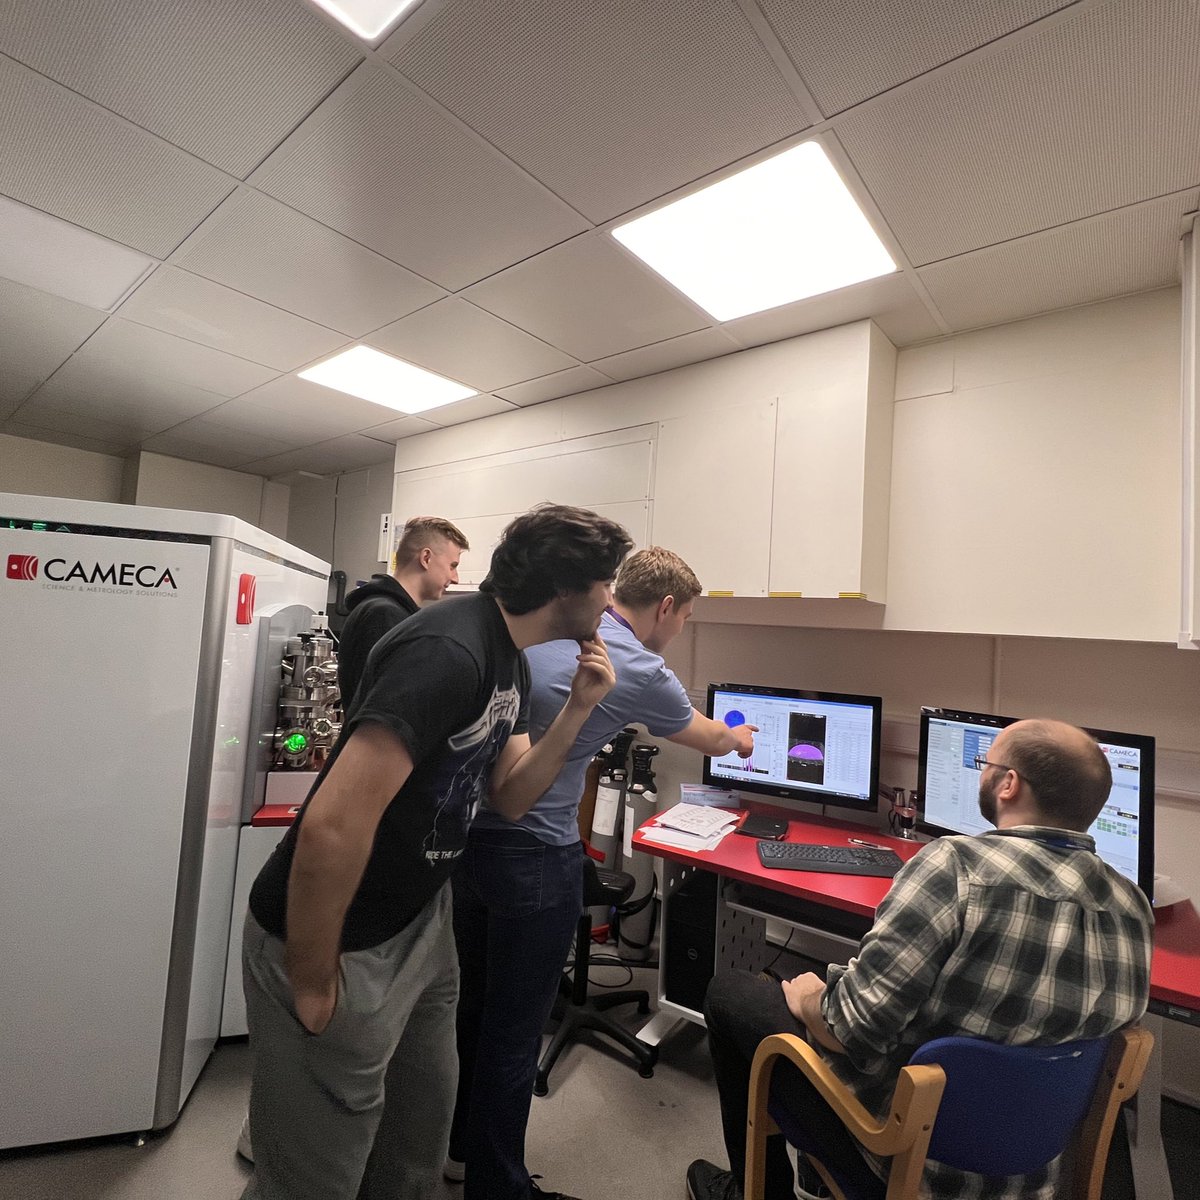 My new PhD students Neil Mulcahy, Lukas Worch & Geri Topore learning atom probe tomography from the awesome #APT ninja Dr James Douglas 🤩🔬@CDT_ACM @ImpMaterials @RoyceImperial @royalsociety @CAMECA_News @bat__go @NicolosiGroup